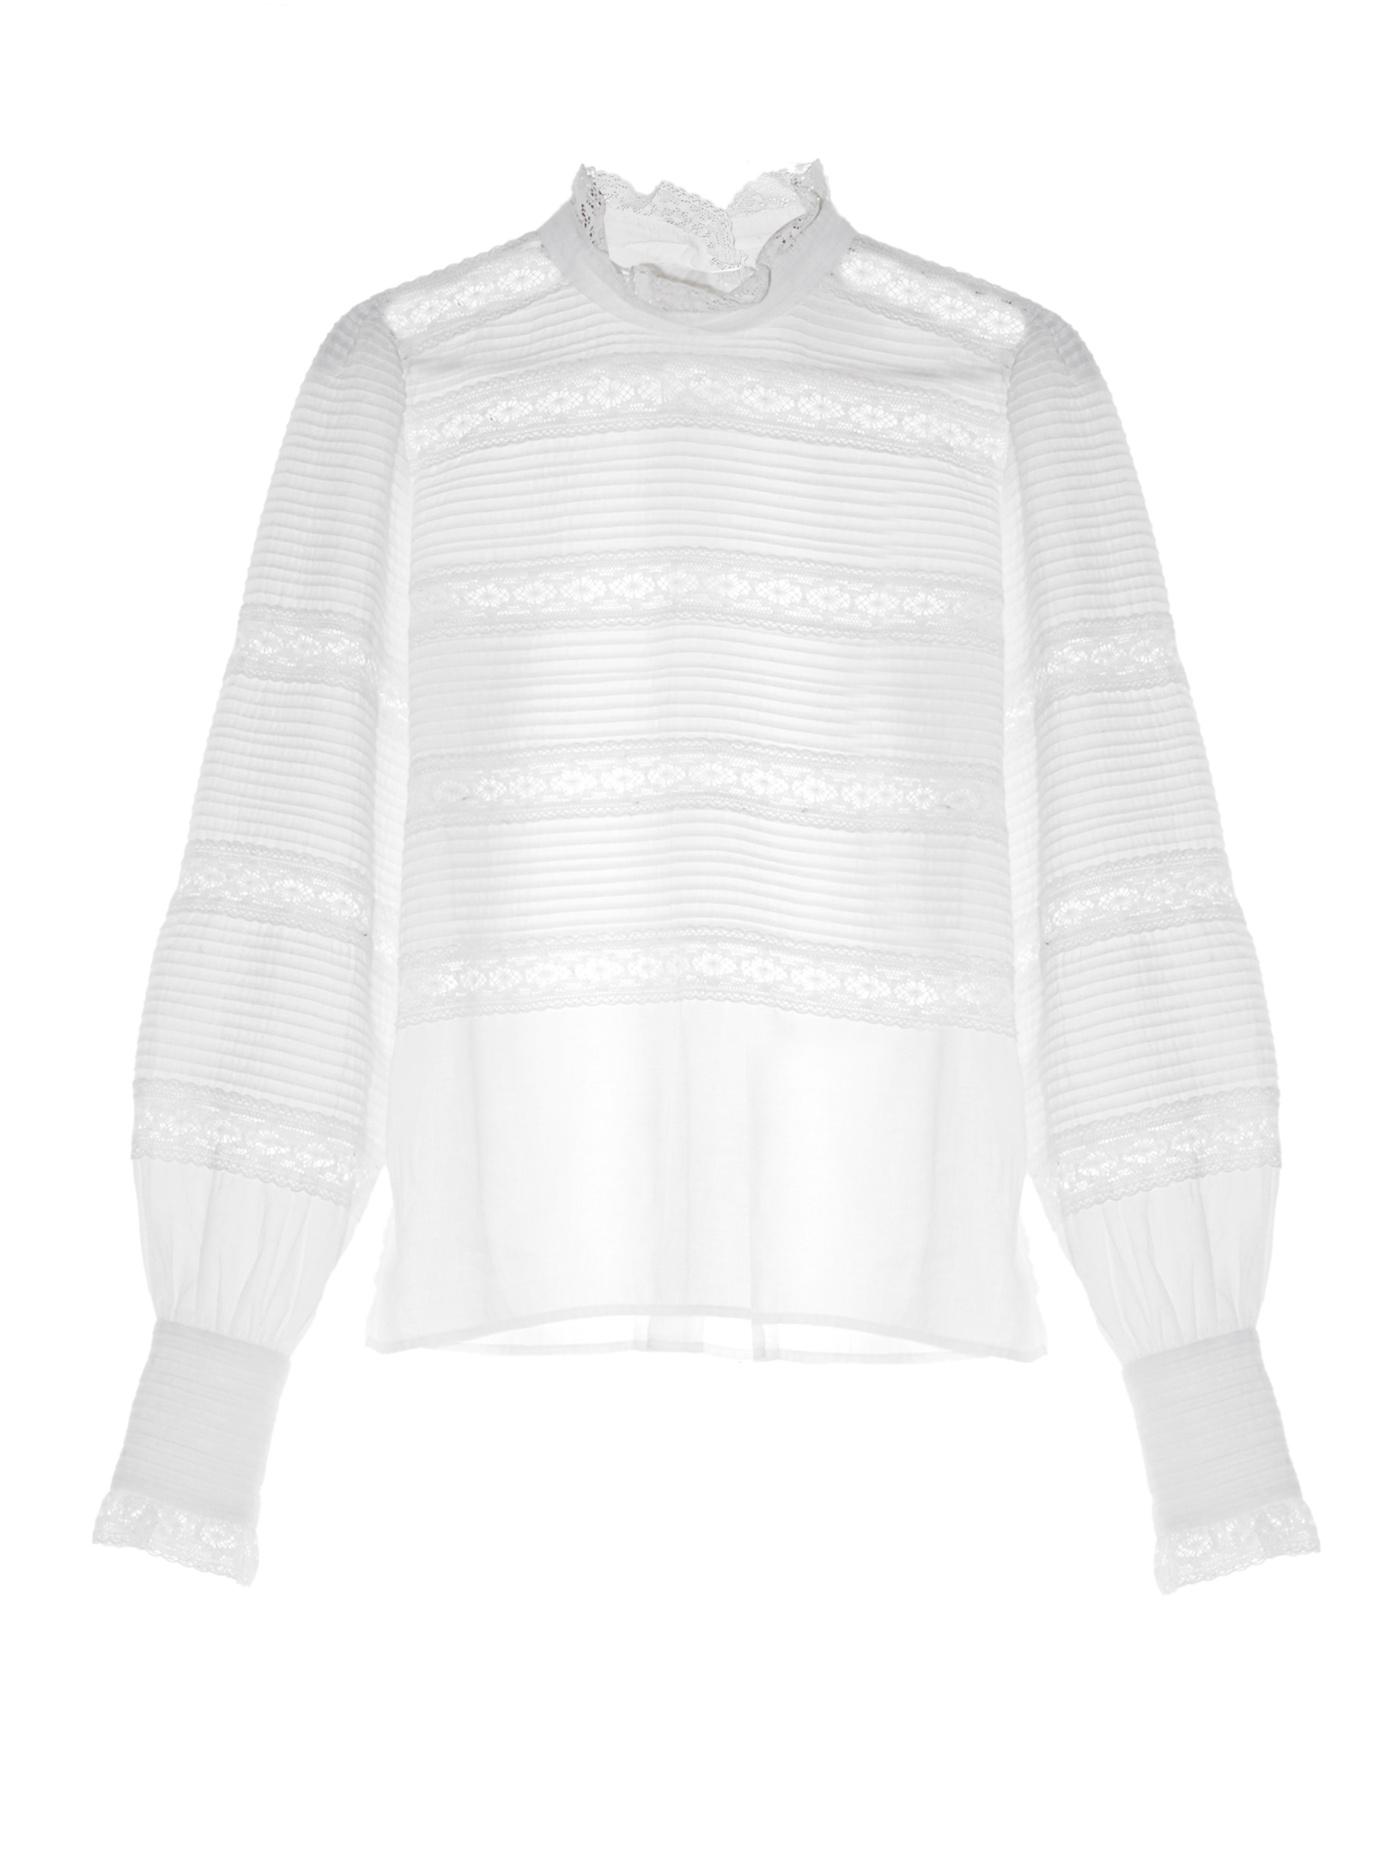 Étoile Isabel Marant Ria High-neck Lace-insert Blouse in White | Lyst